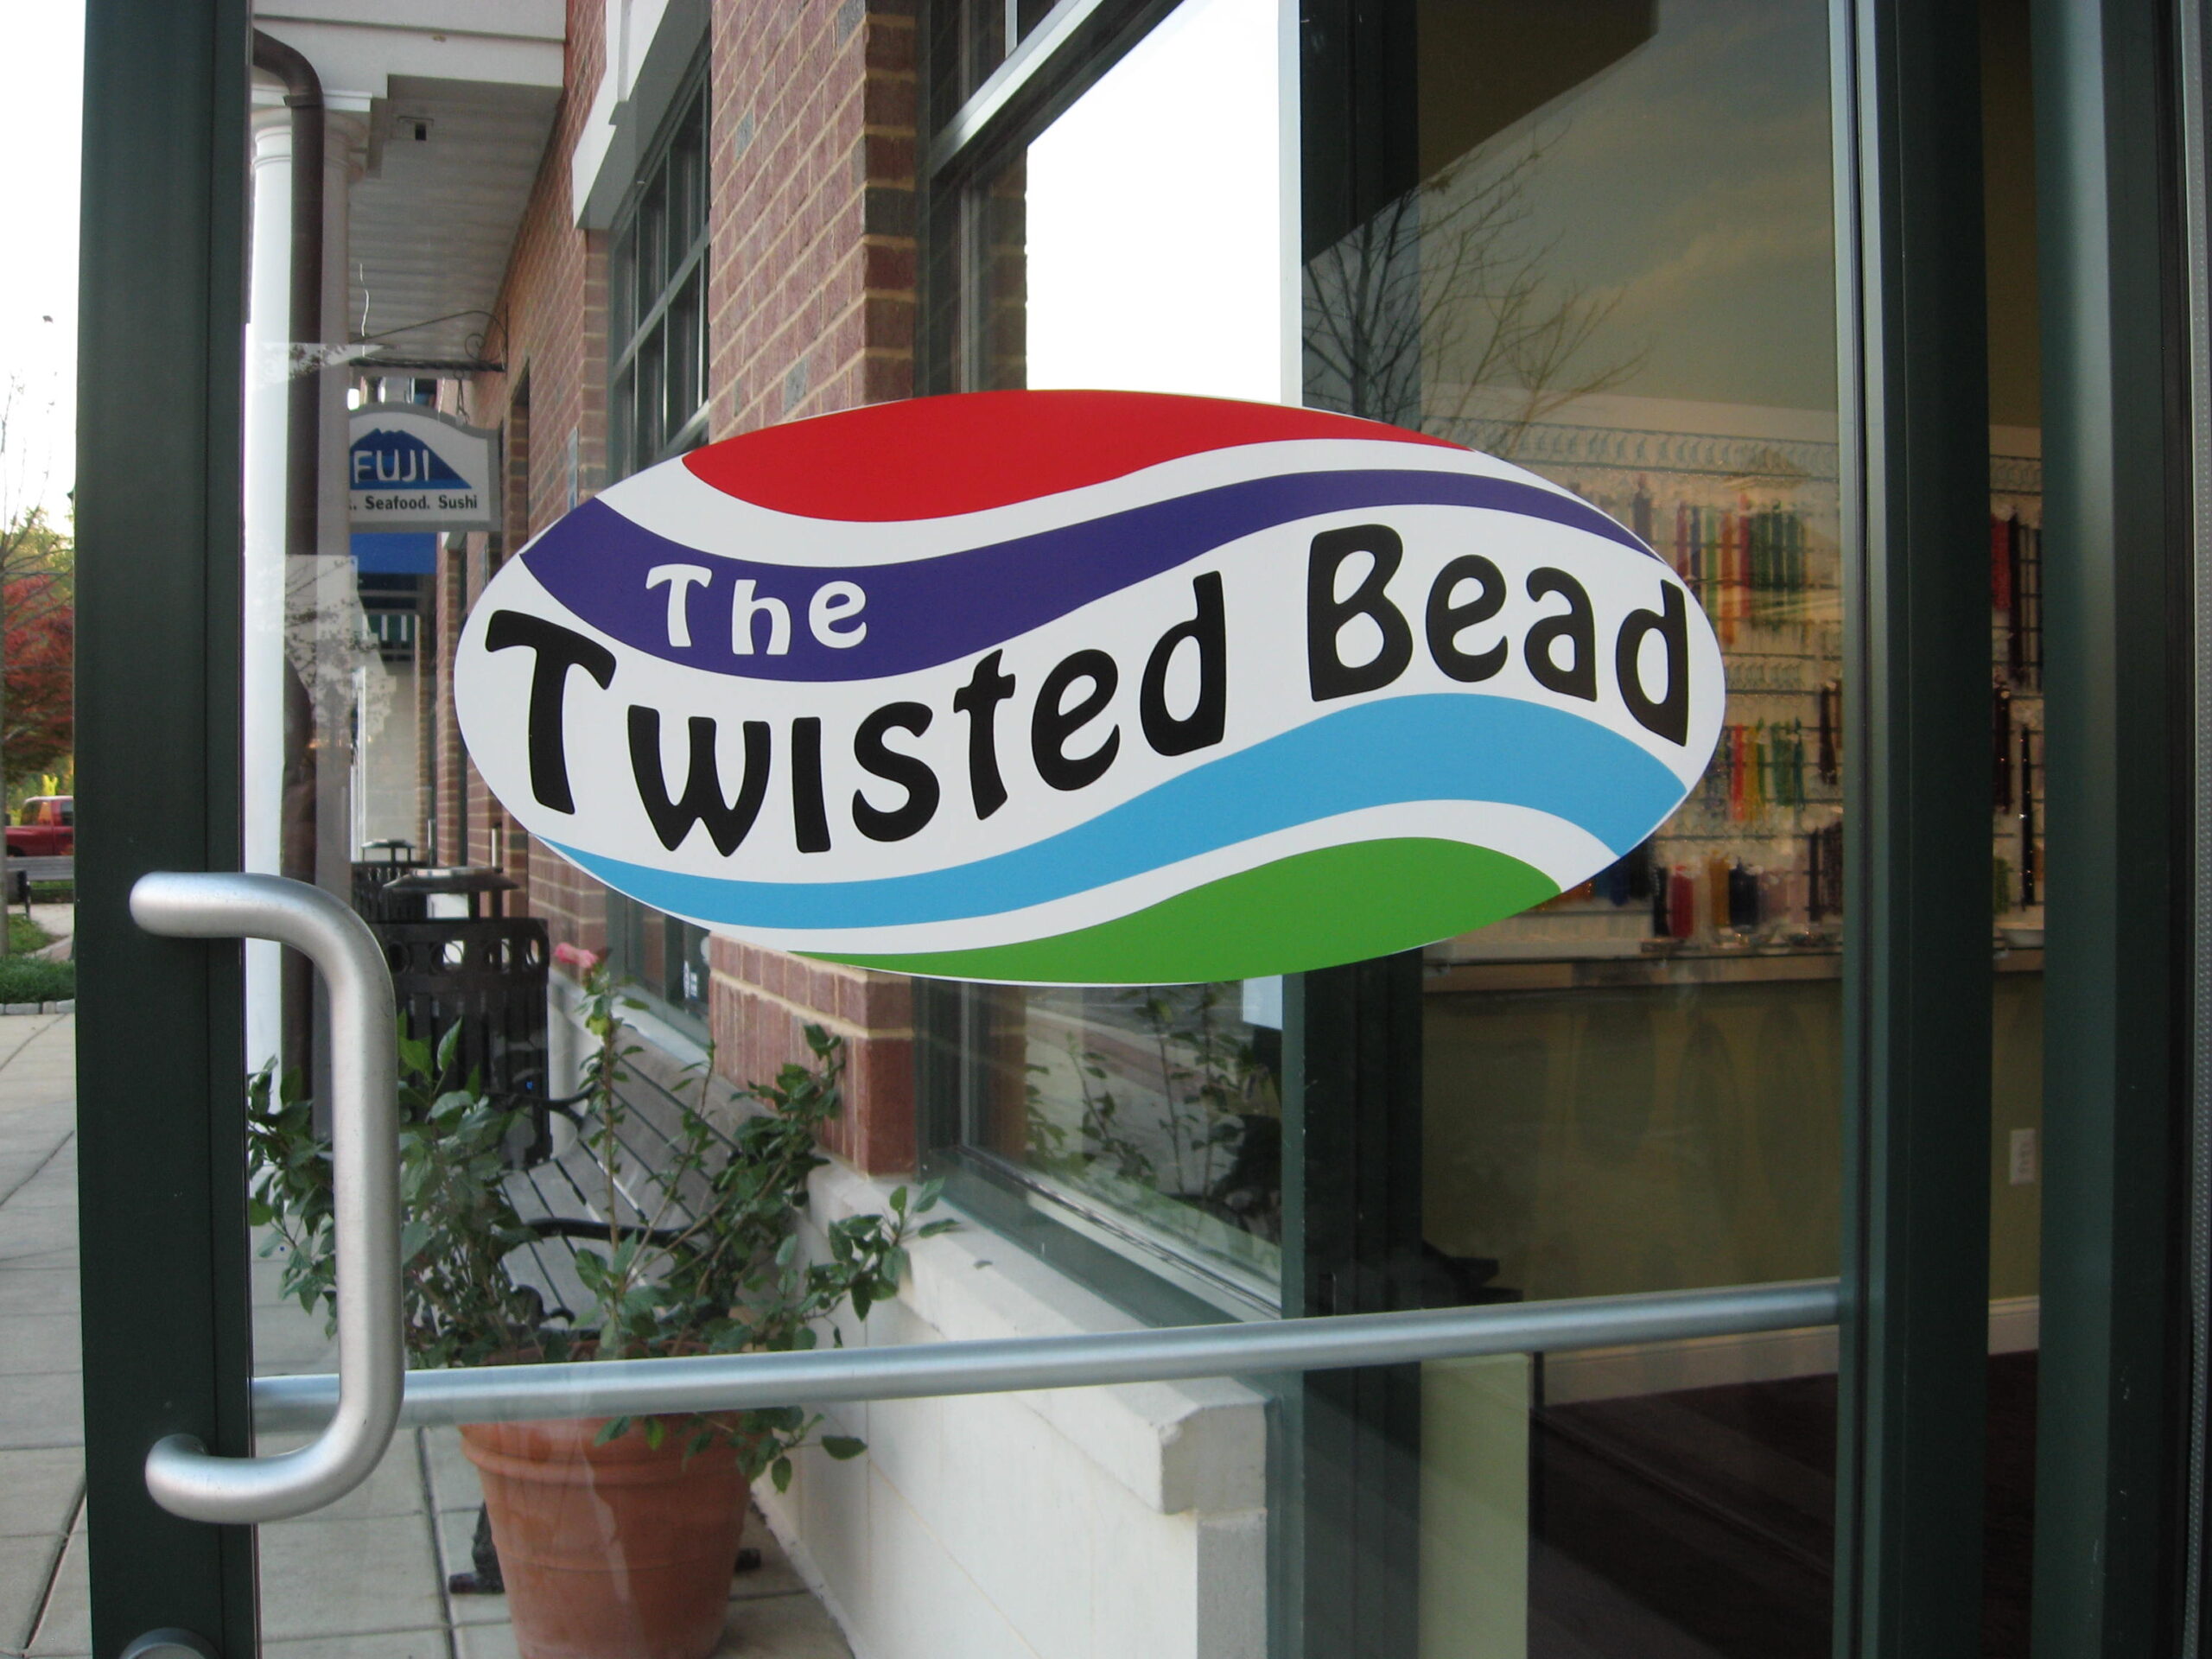 The Twisted Bead & Rock Shop door and logo.